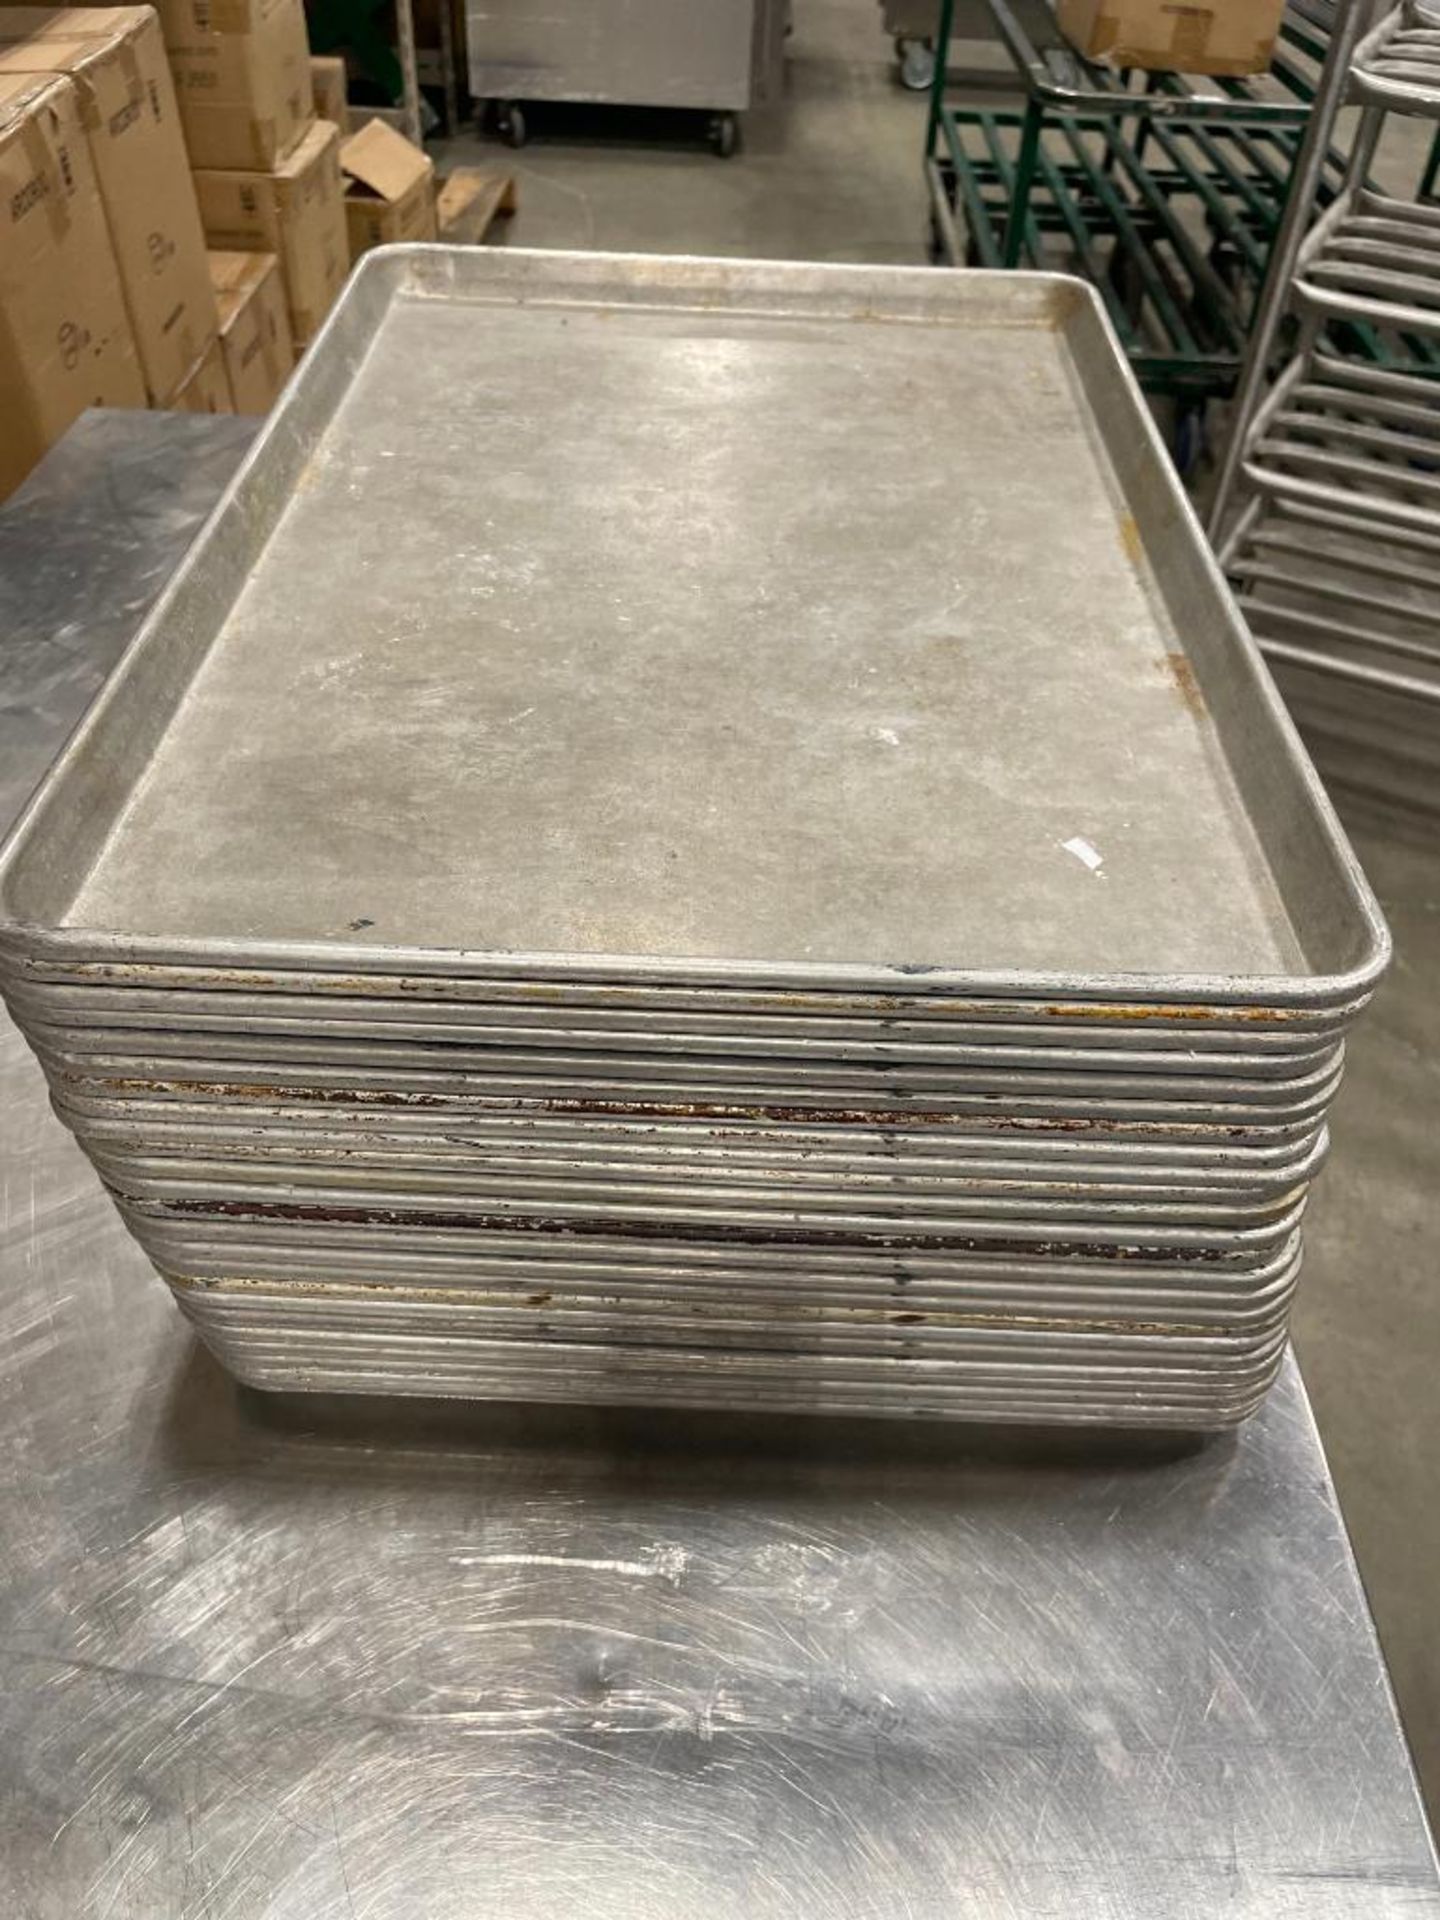 7 TIER STAINLESS STEEL MOBILE PLATTER CART WITH (24) FULL SIZE BUN PANS - Image 4 of 6